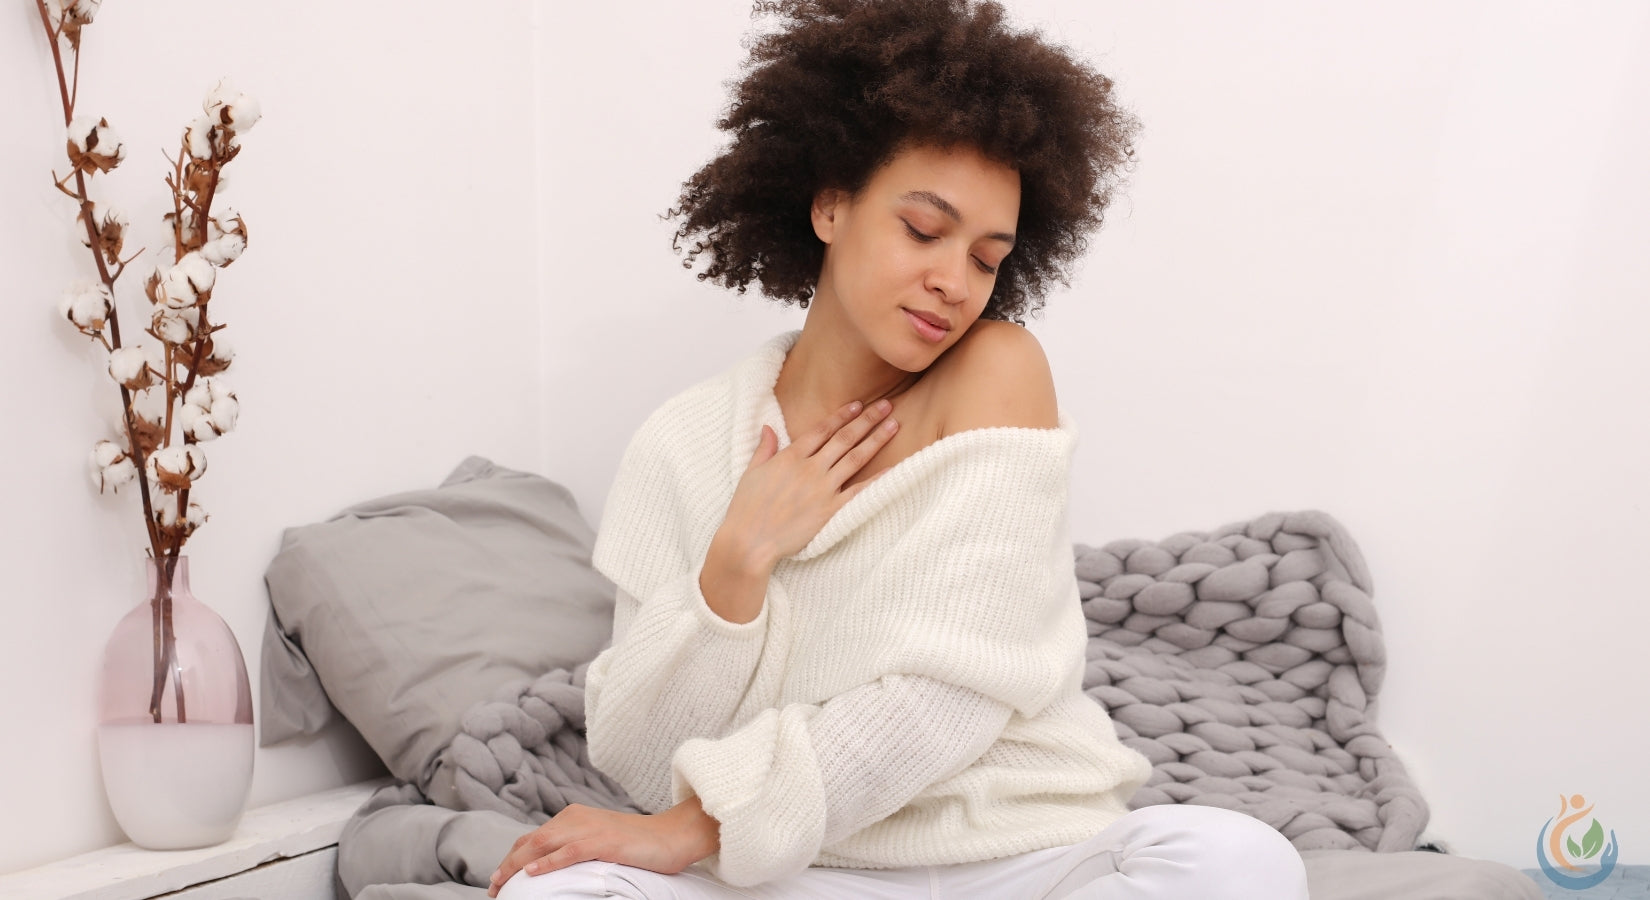 Beautiful woman with dark short curly hair comfy in bed with cream sweater and grey knitted blanket